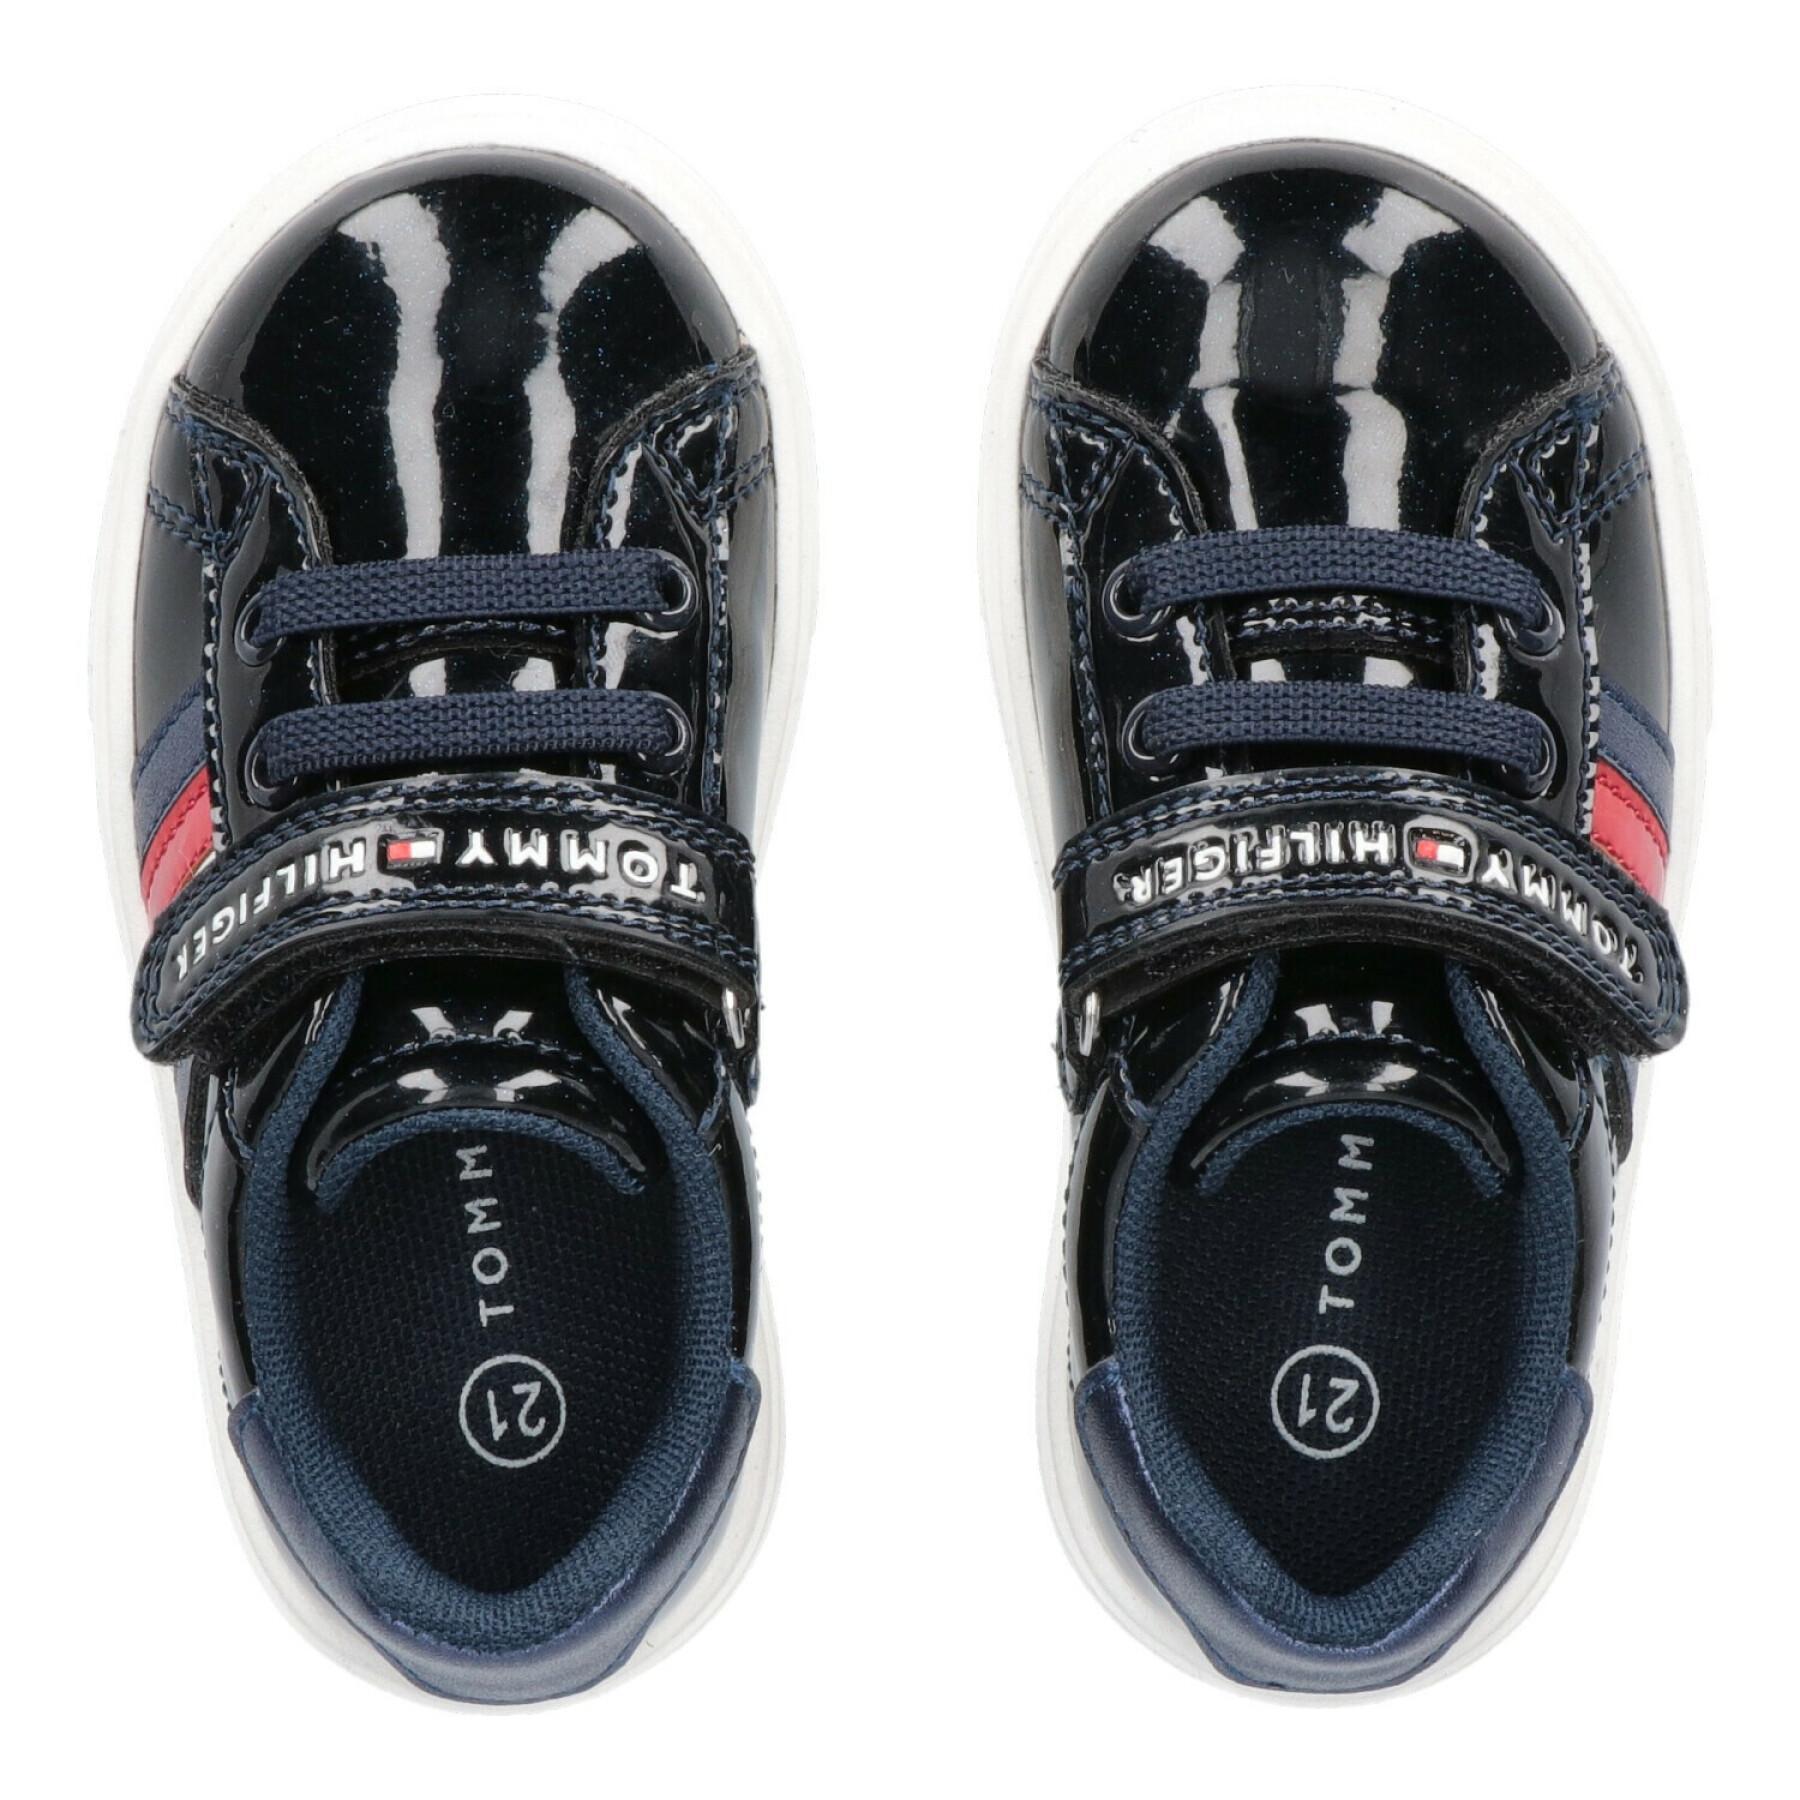 Sneakers aus Baby-Spitze Tommy Hilfiger Velcro